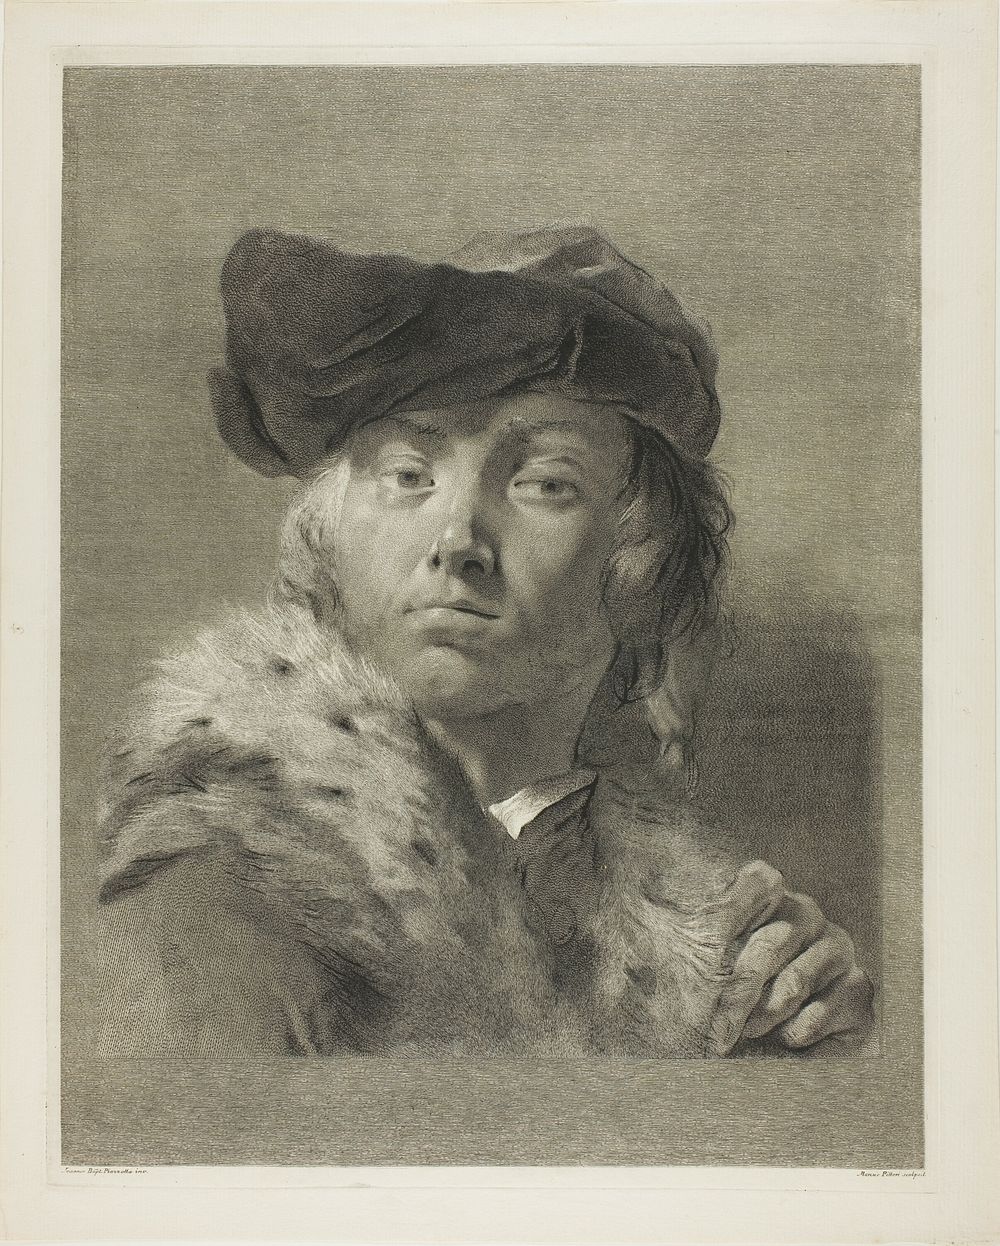 Bust of a Young Man with a Fur-Collared Coat by Giovanni Marco Pitteri